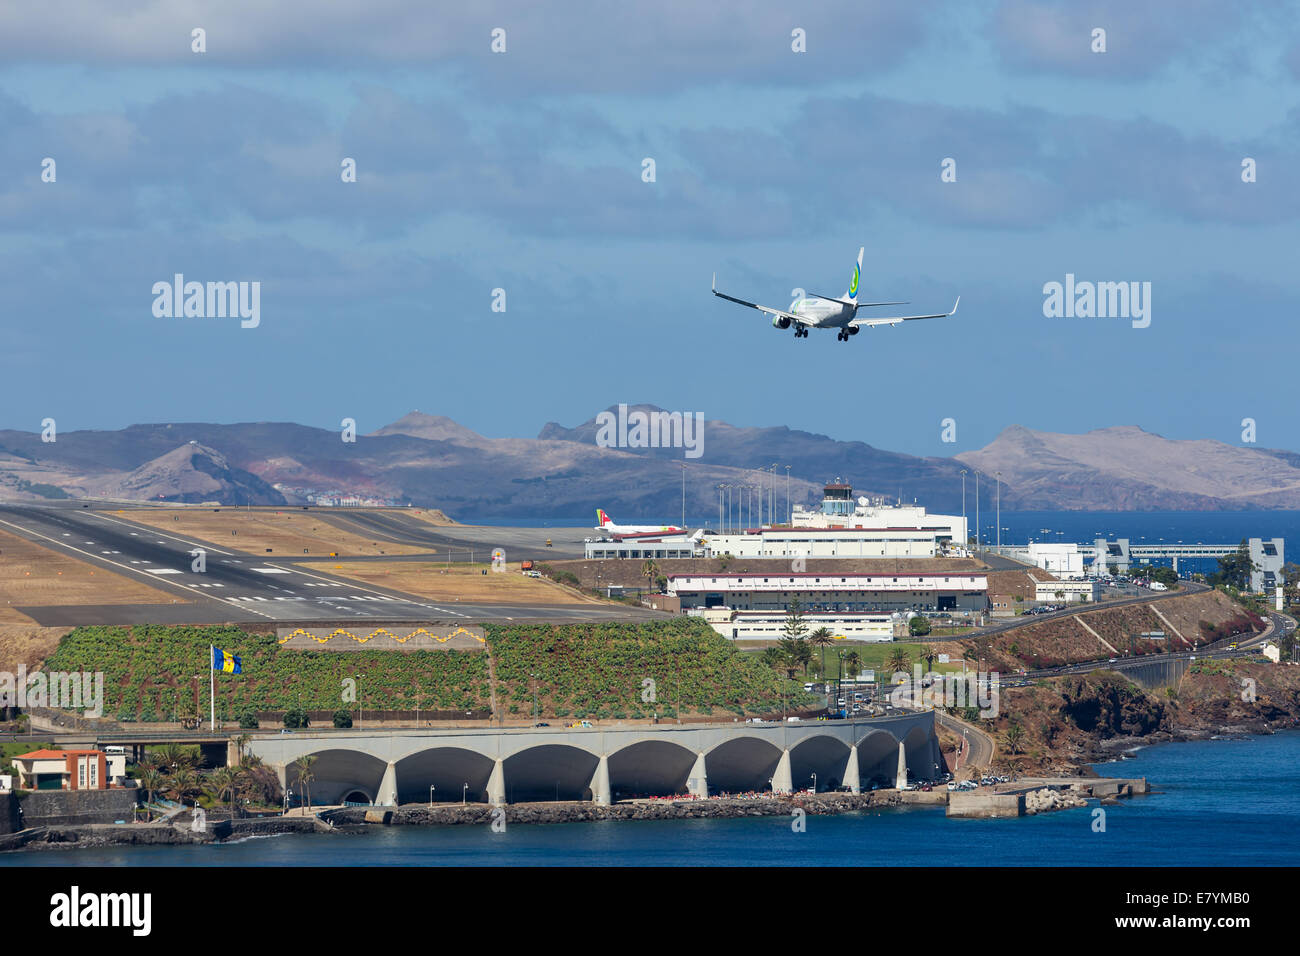 Boeing 737 is approaching Funchal Airport at Madeira, Portugal Stock Photo